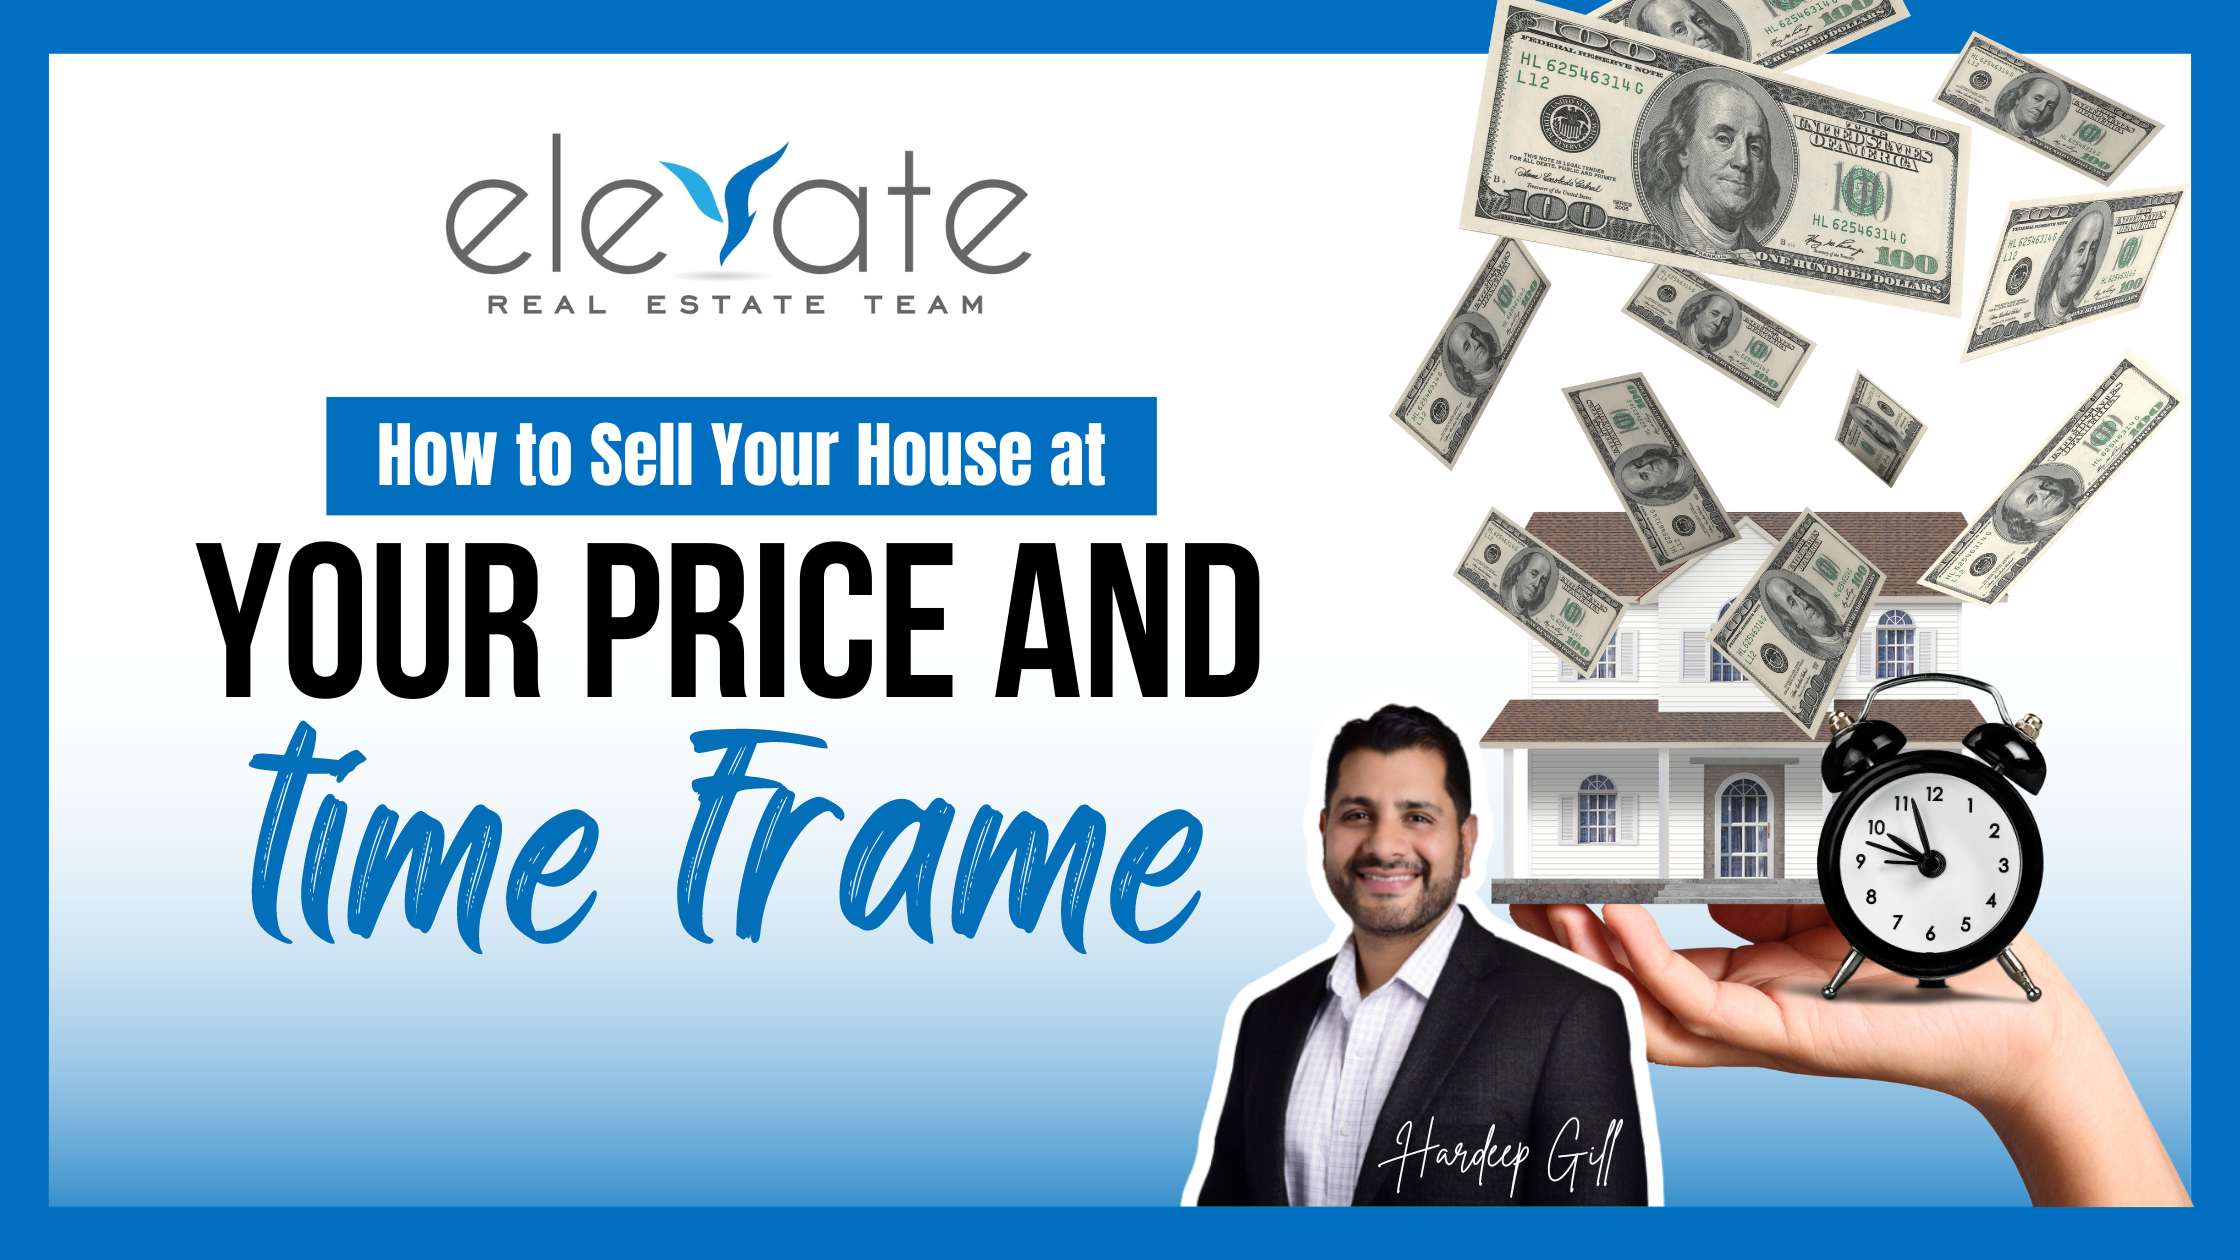 How to Sell Your House at YOUR PRICE AND TIME FRAME